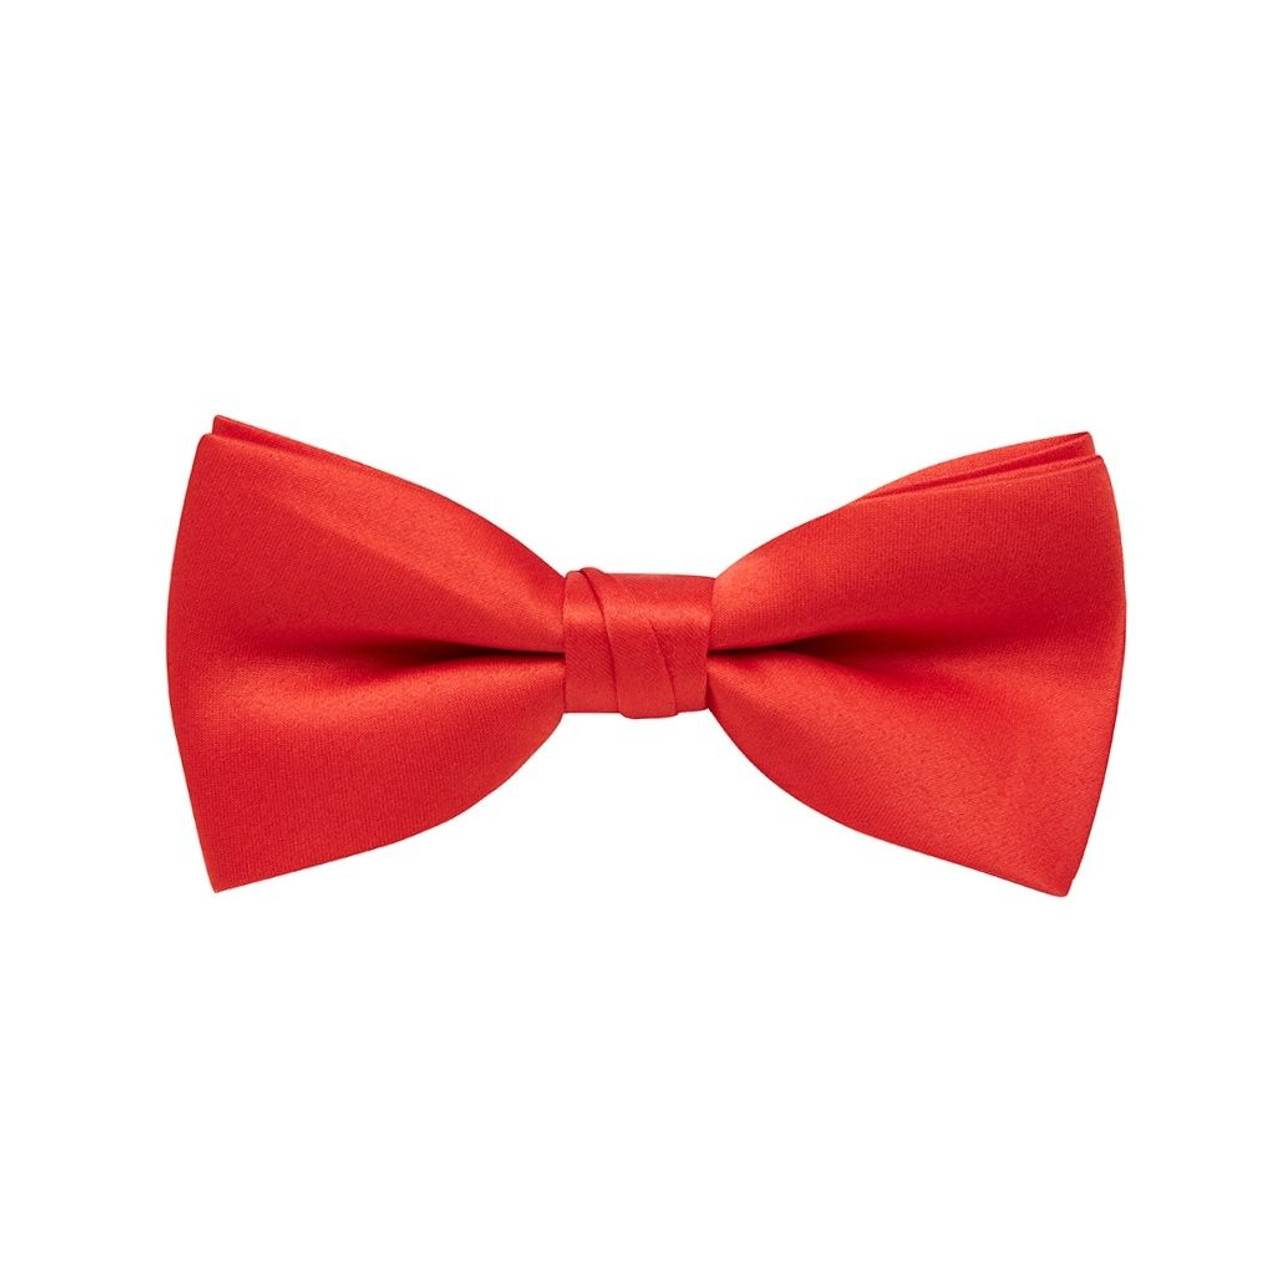 BOW TIE + POCKET SQUARE SET. Plain. Red. Supplied with matching pocket square.